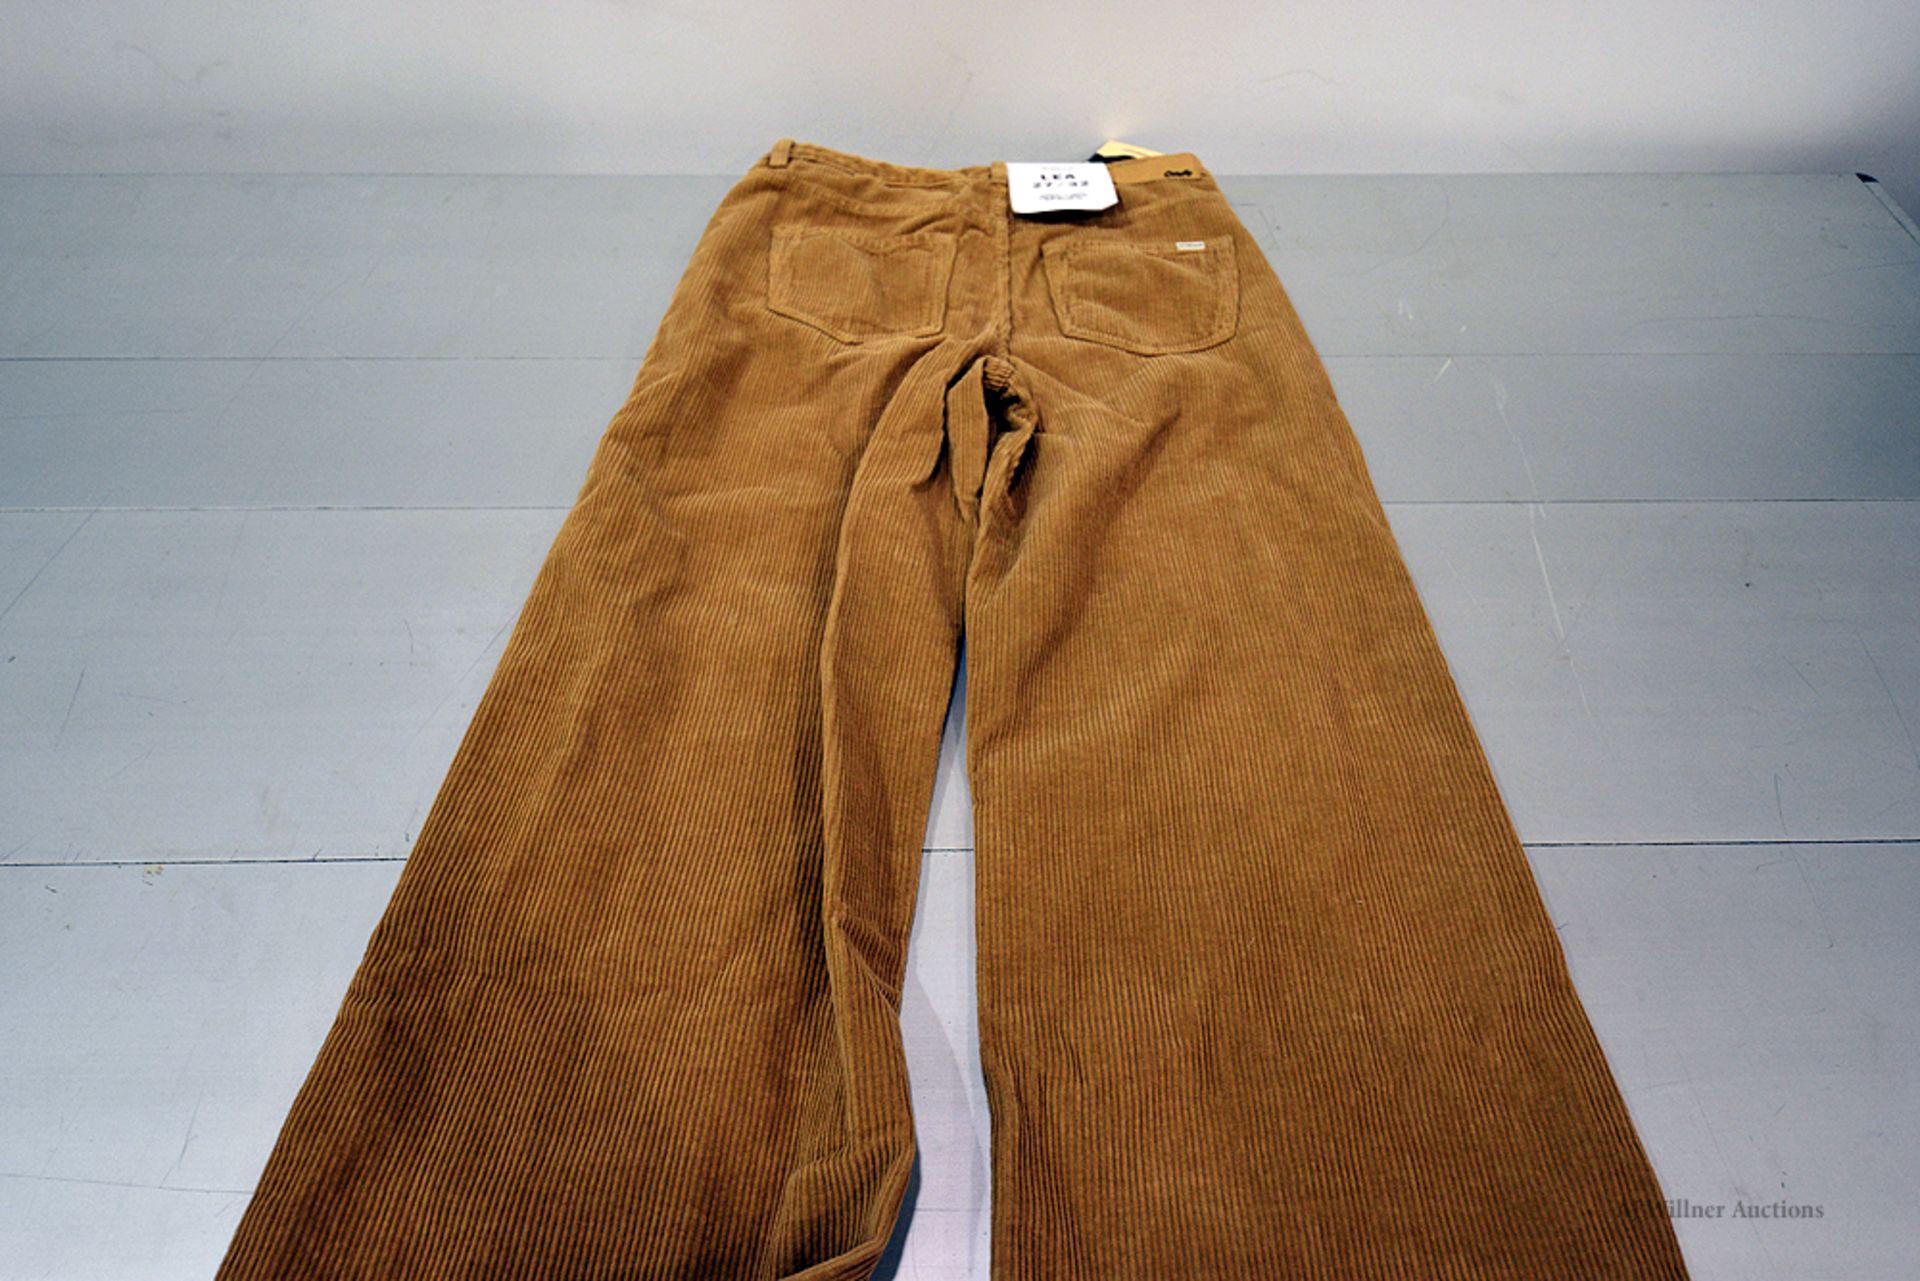 The Cords & Co. "Lea" Women's/High-Waist/Loose Fit/Wide Bottom Pants MSRP $160 - Image 3 of 5